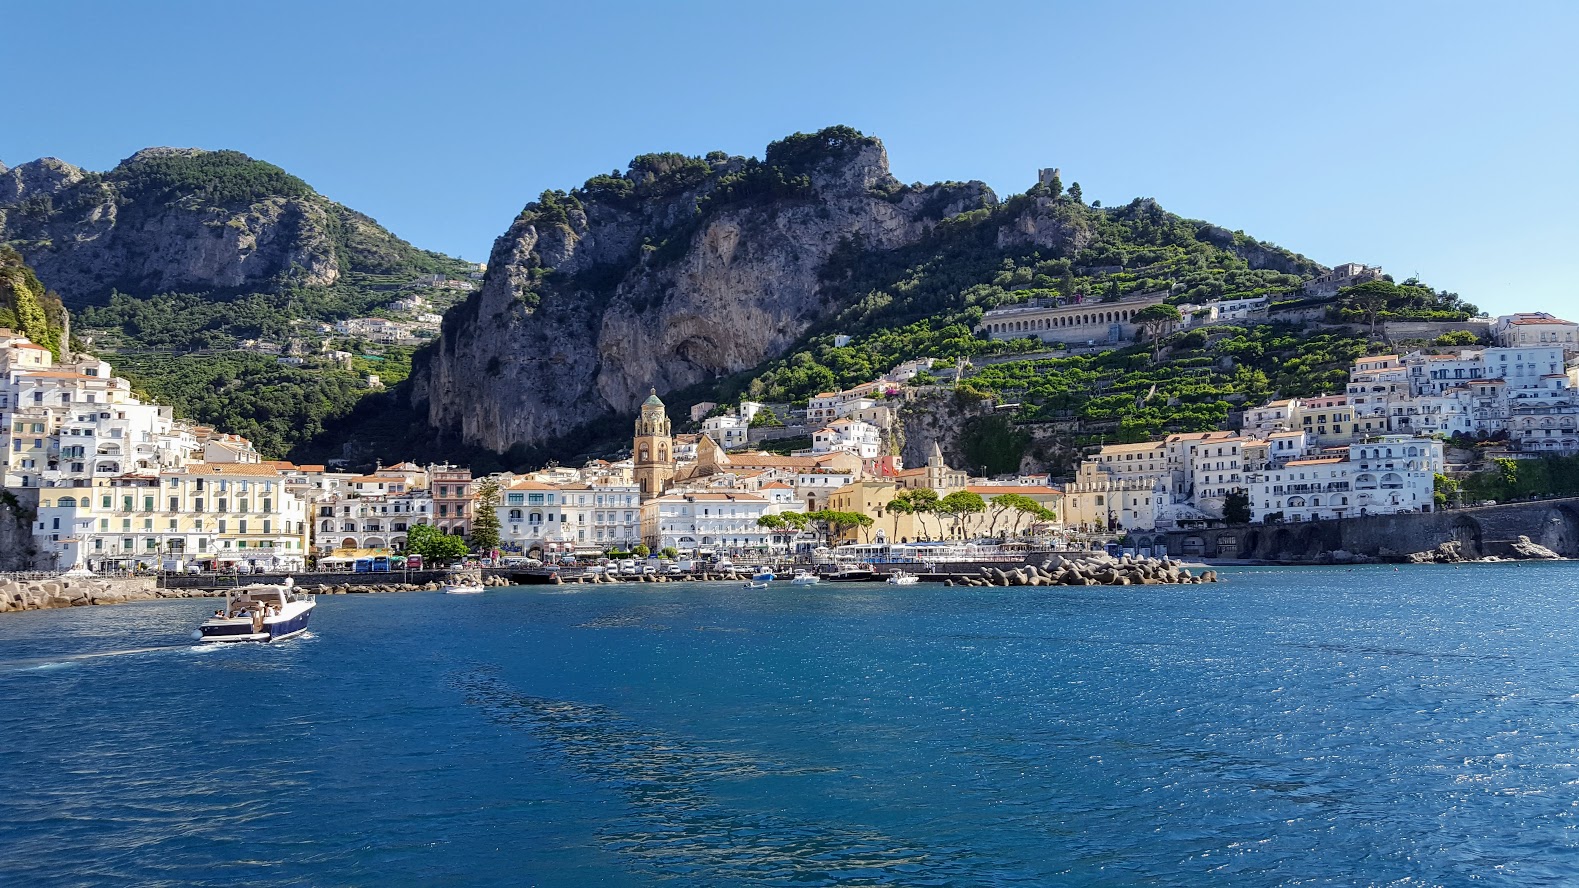 Wondering what to do in Amalfi & on the Amalfi Coast? We've the very best tours, towns, itineraries, moments and magic of the Amalfi Coast all in one place